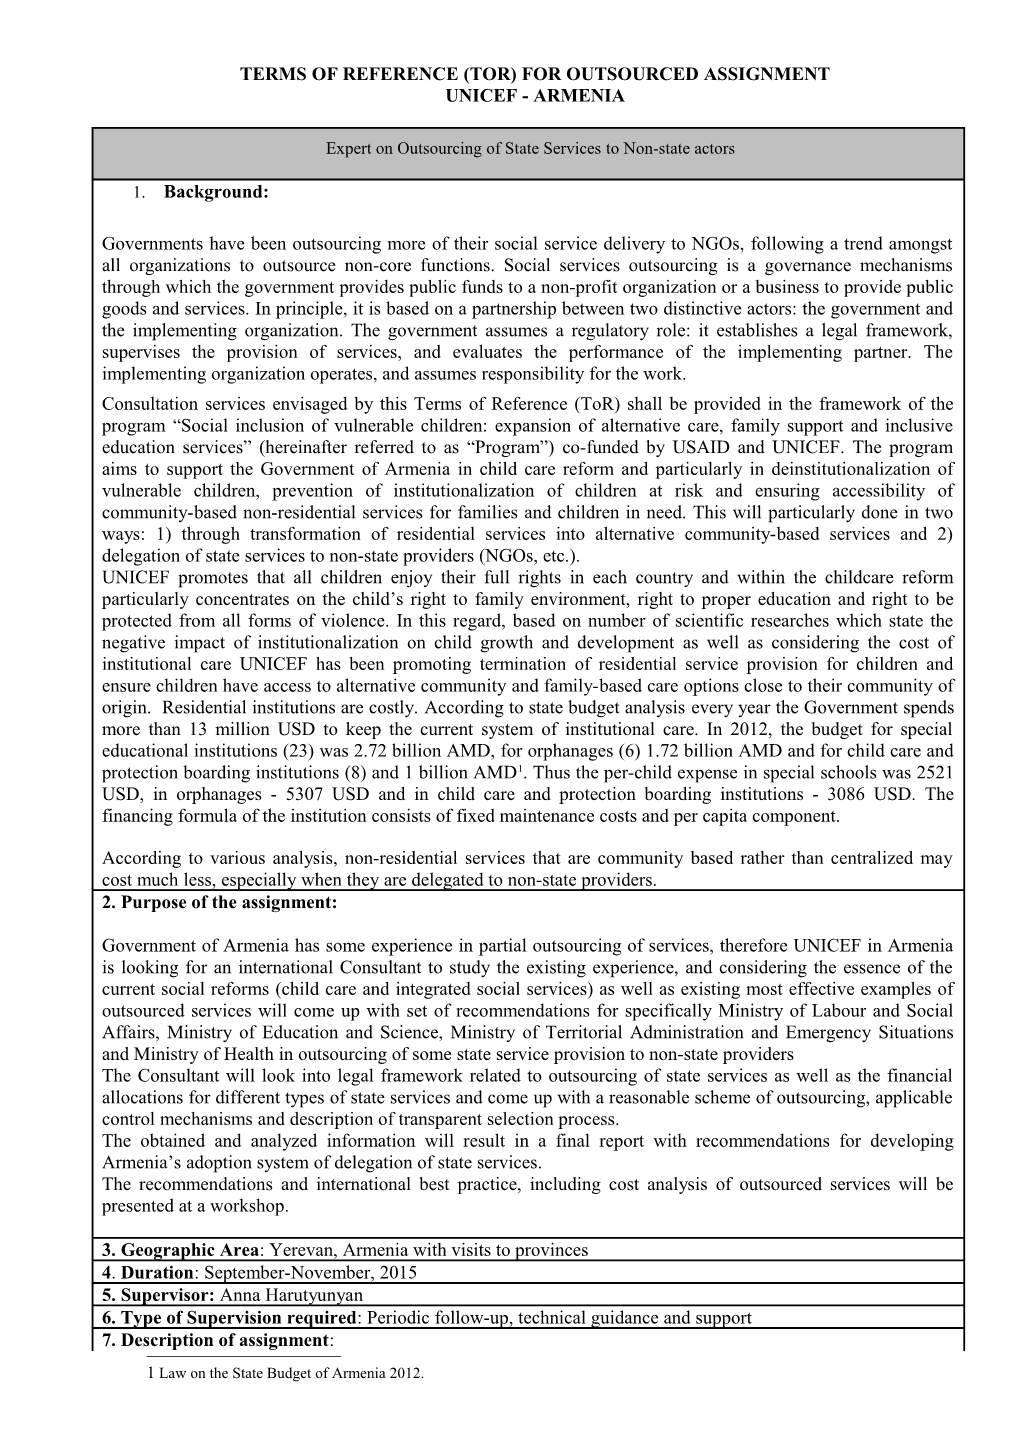 UNICEF-Swaziland: TERMS of REFERENCE (TOR) for OUTSOURCED ASSIGNMENT